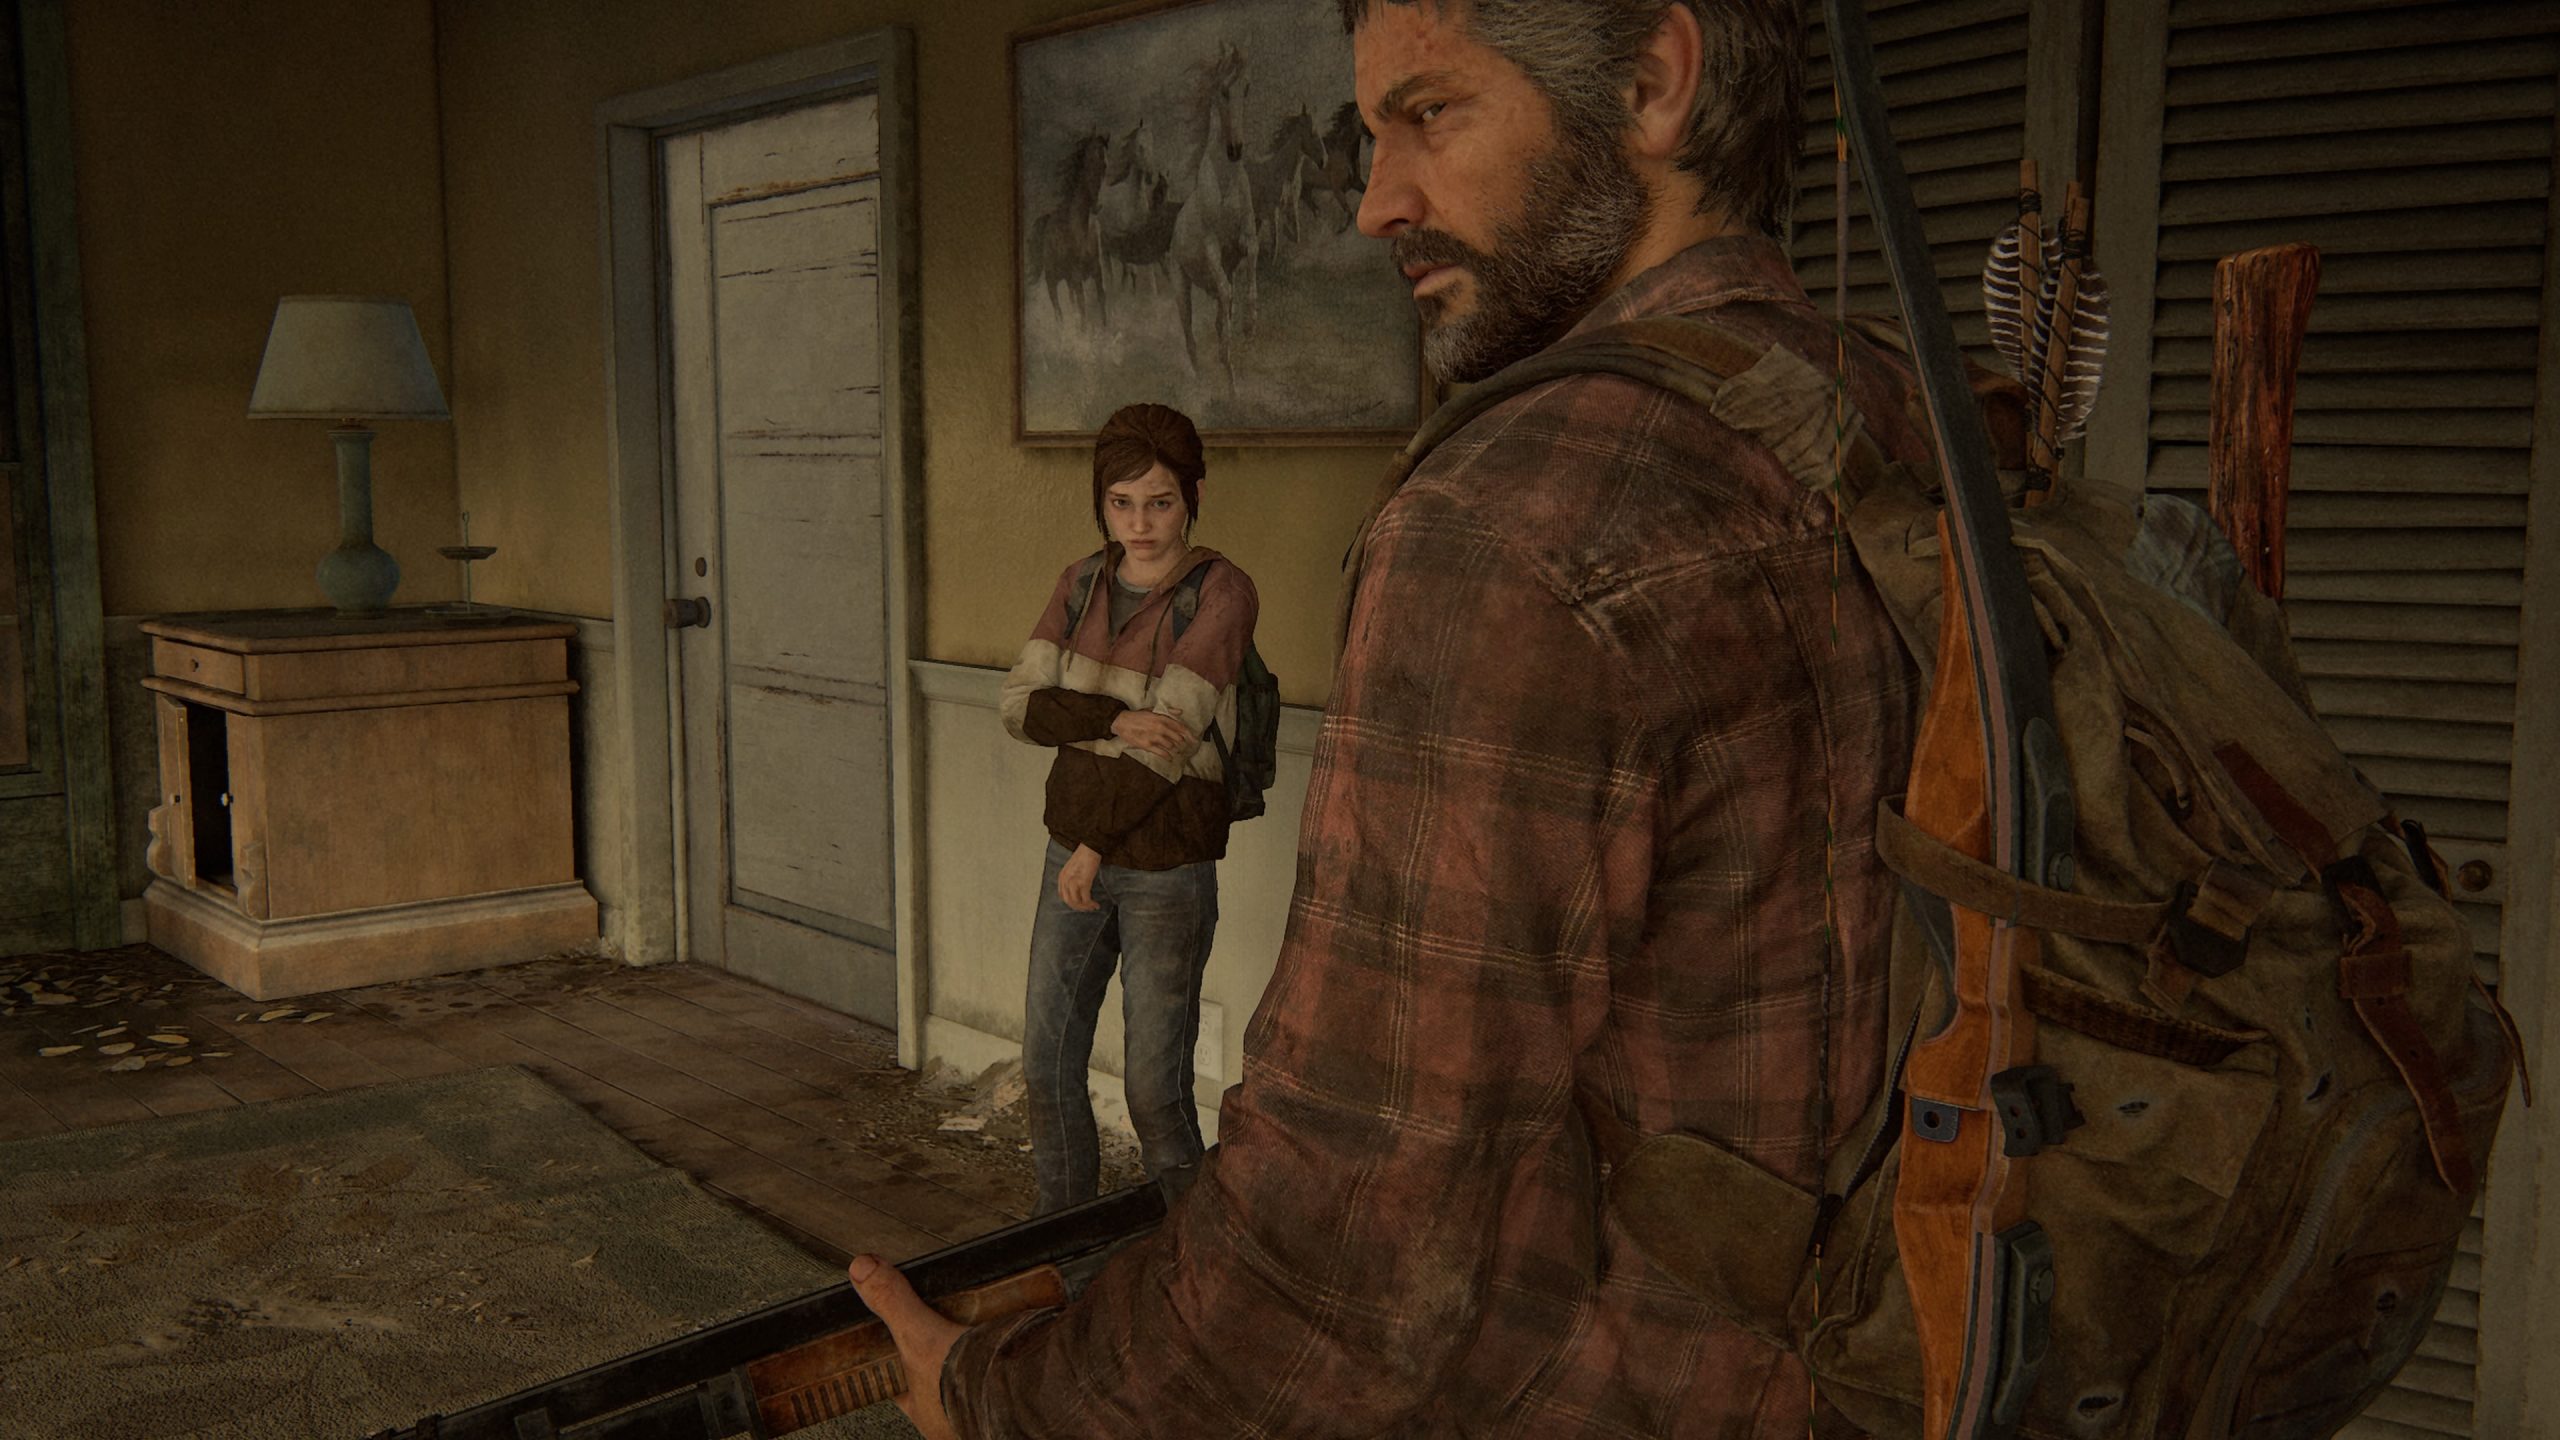 'The Last of Us Part I' is a gorgeous, faithful, expensive remake | DeviceDaily.com